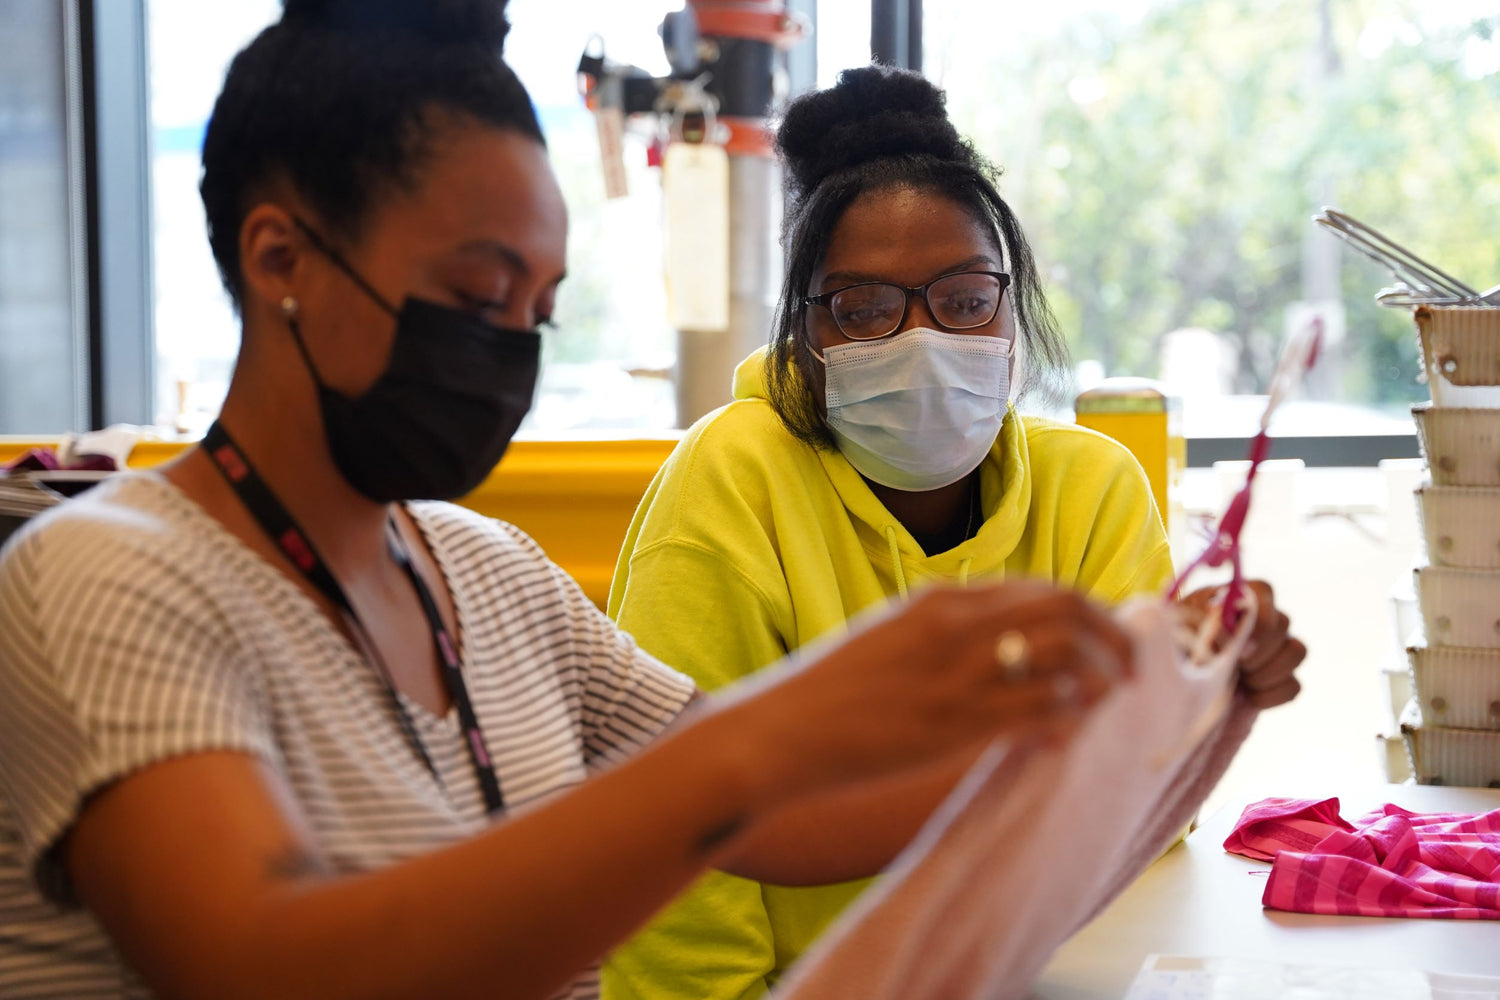 Two women diligently collaborating on a project while wearing protective face masks